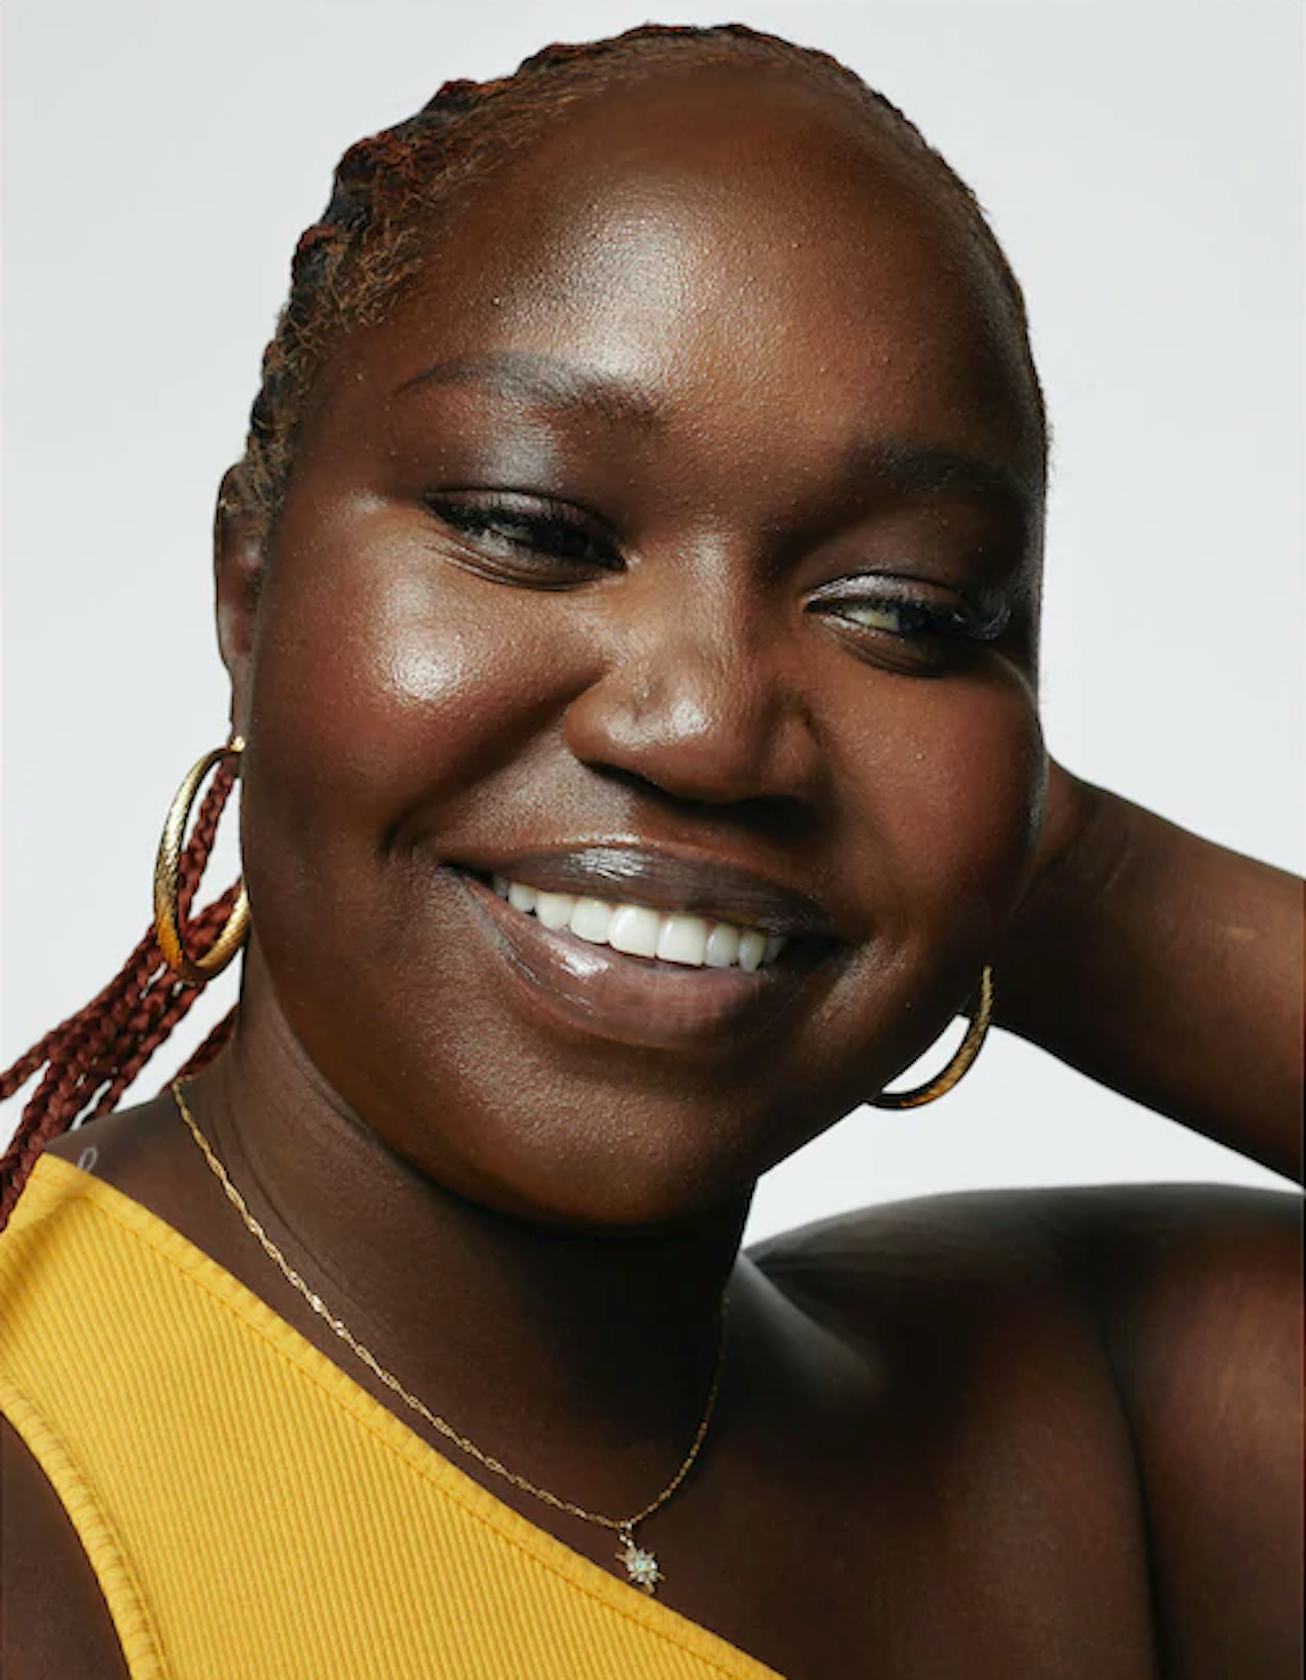 Black model smiling for Milk Makeup ad campaign in yellow shirt and braids.